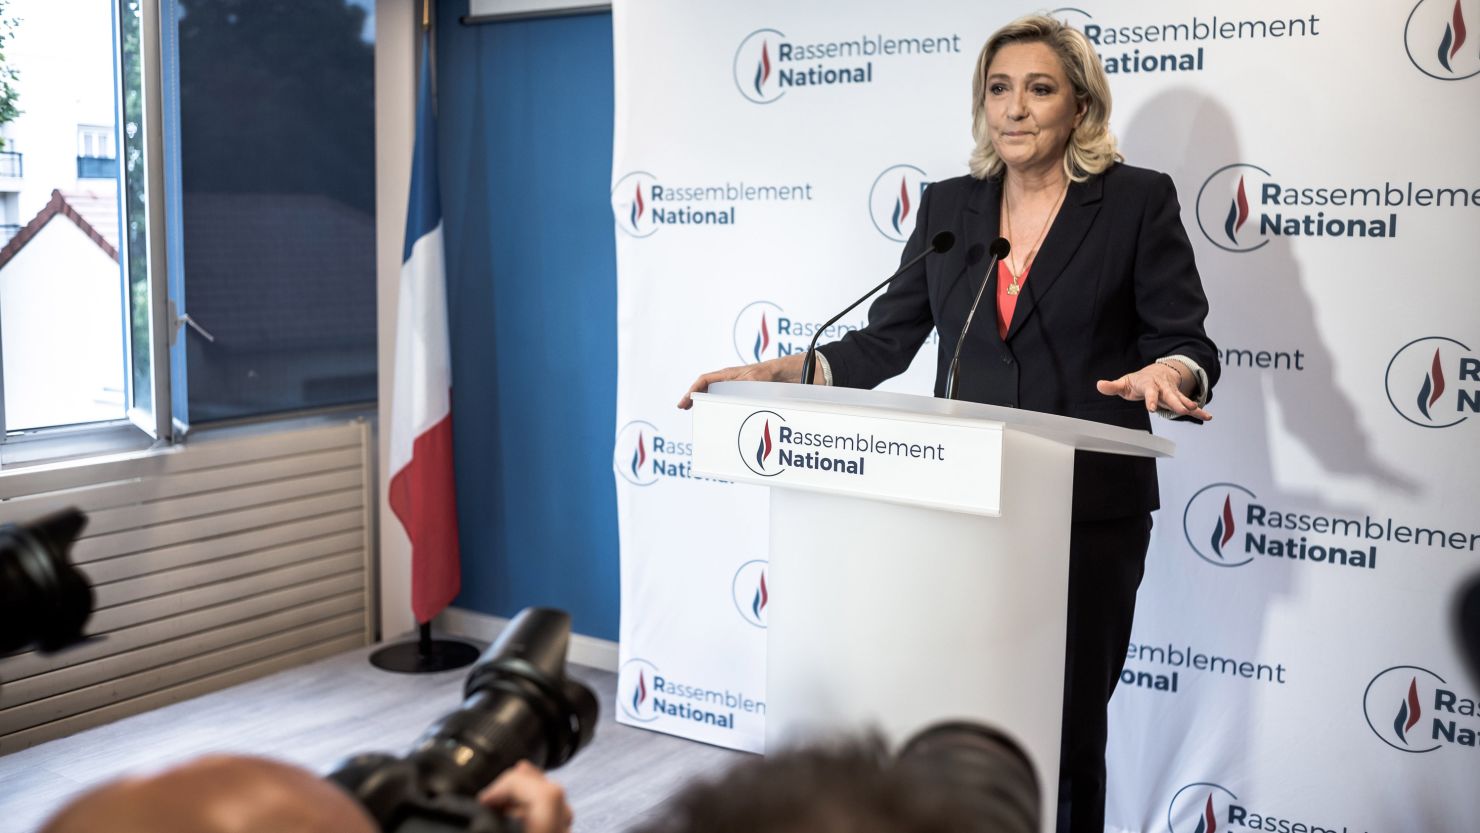 Marine Le Pen had hoped regional elections would bolster her credentials for a 2022 presidential bid.